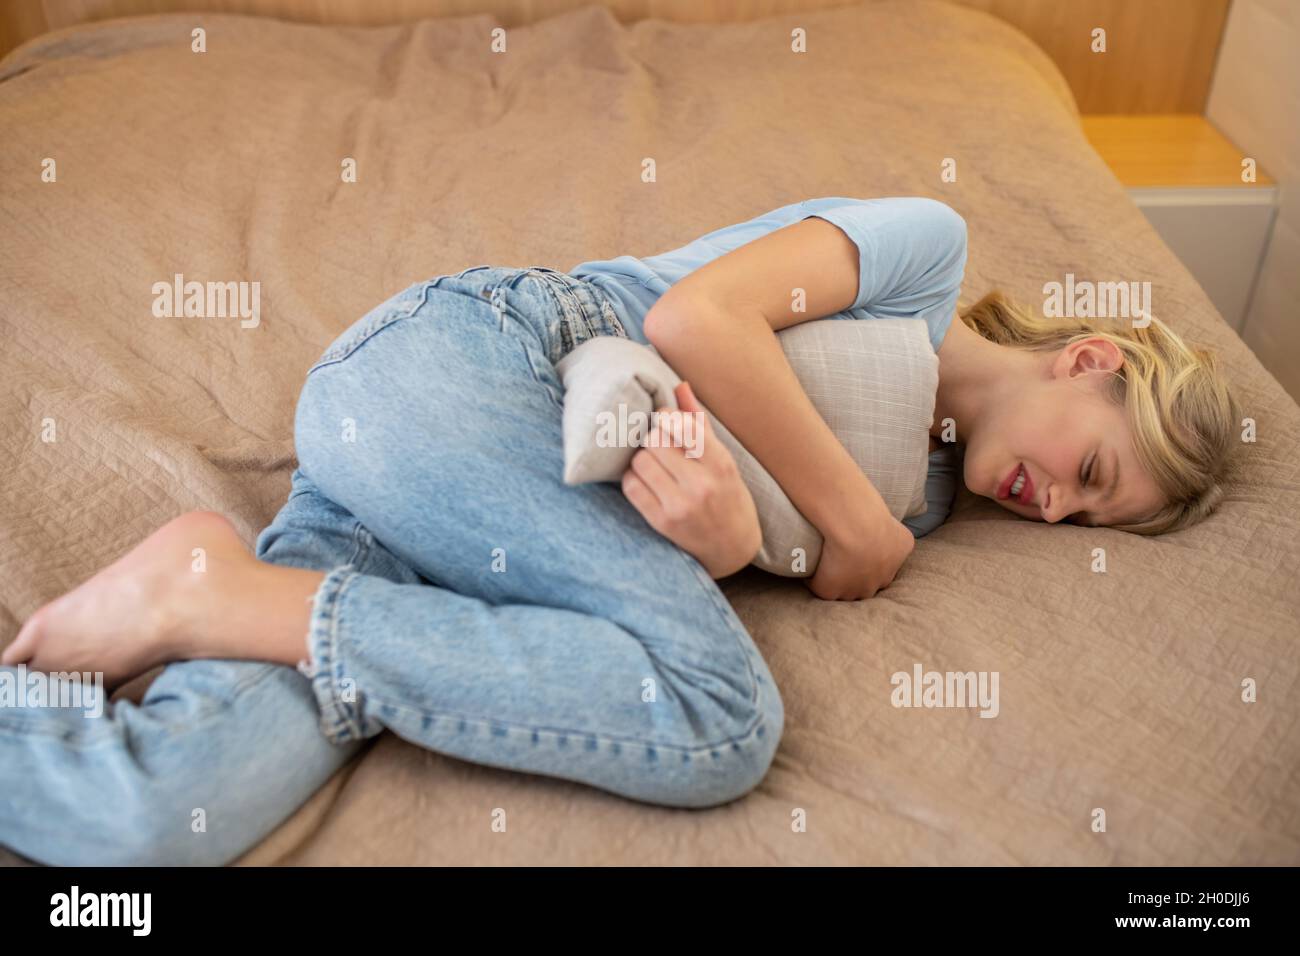 A girl having her critical days and suffering from pain Stock Photo